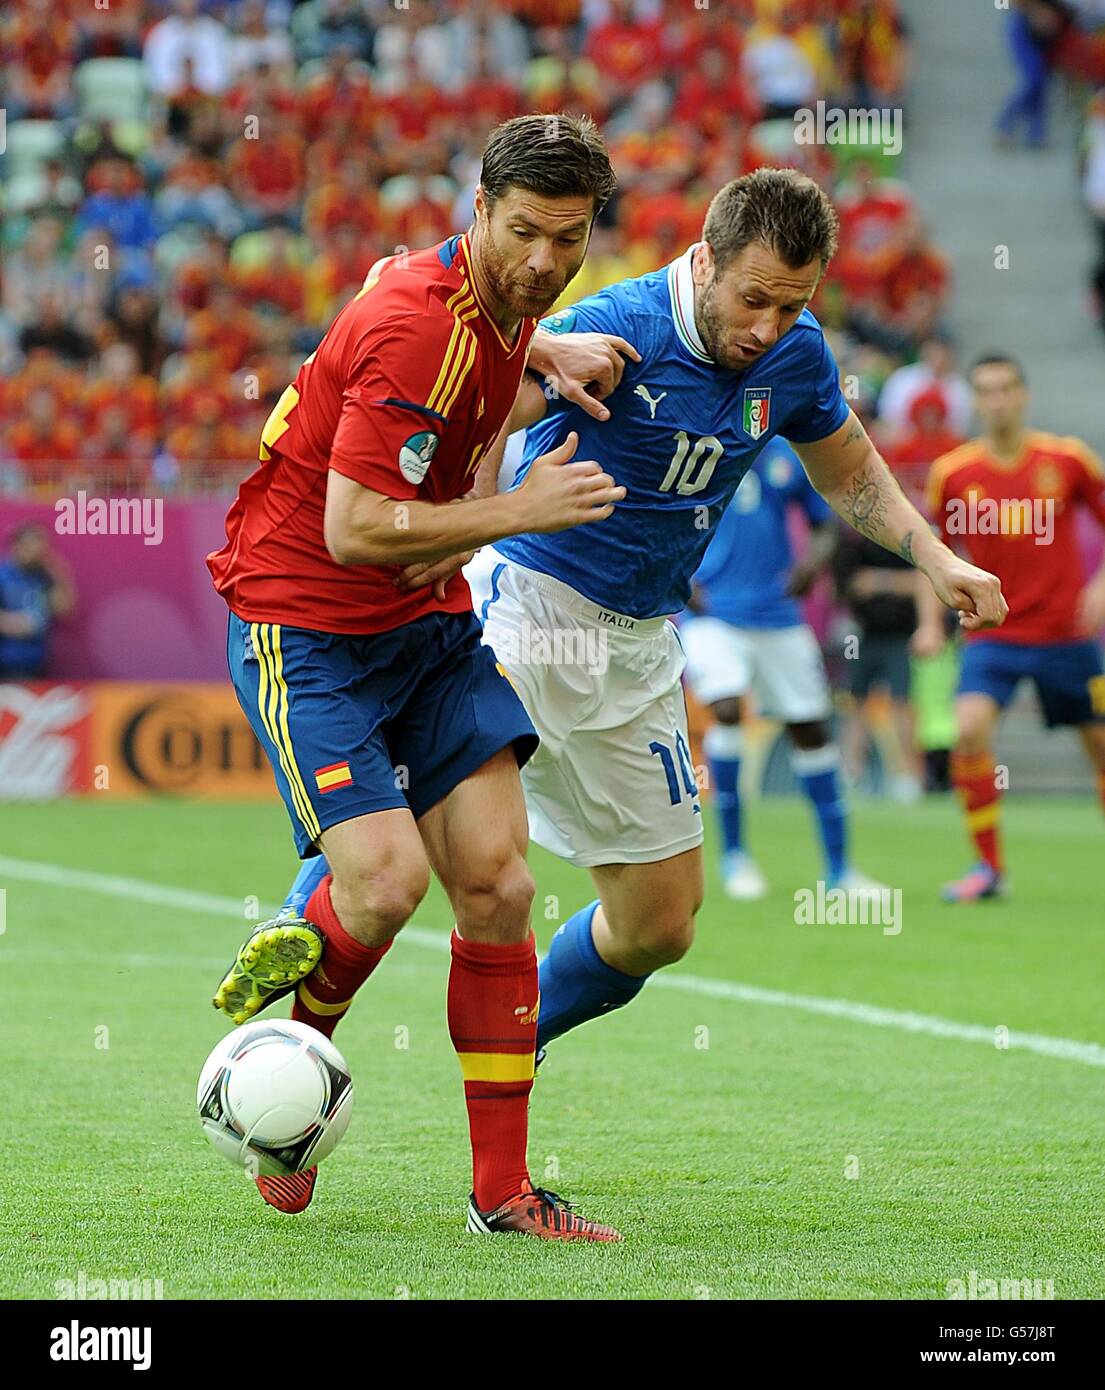 Soccer - UEFA Euro 2012 - Group C - Spain v Italy - Arena Gdansk. Spain's Xabi Alonso (left) and Italy's Antonio Cassano battle for the ball Stock Photo